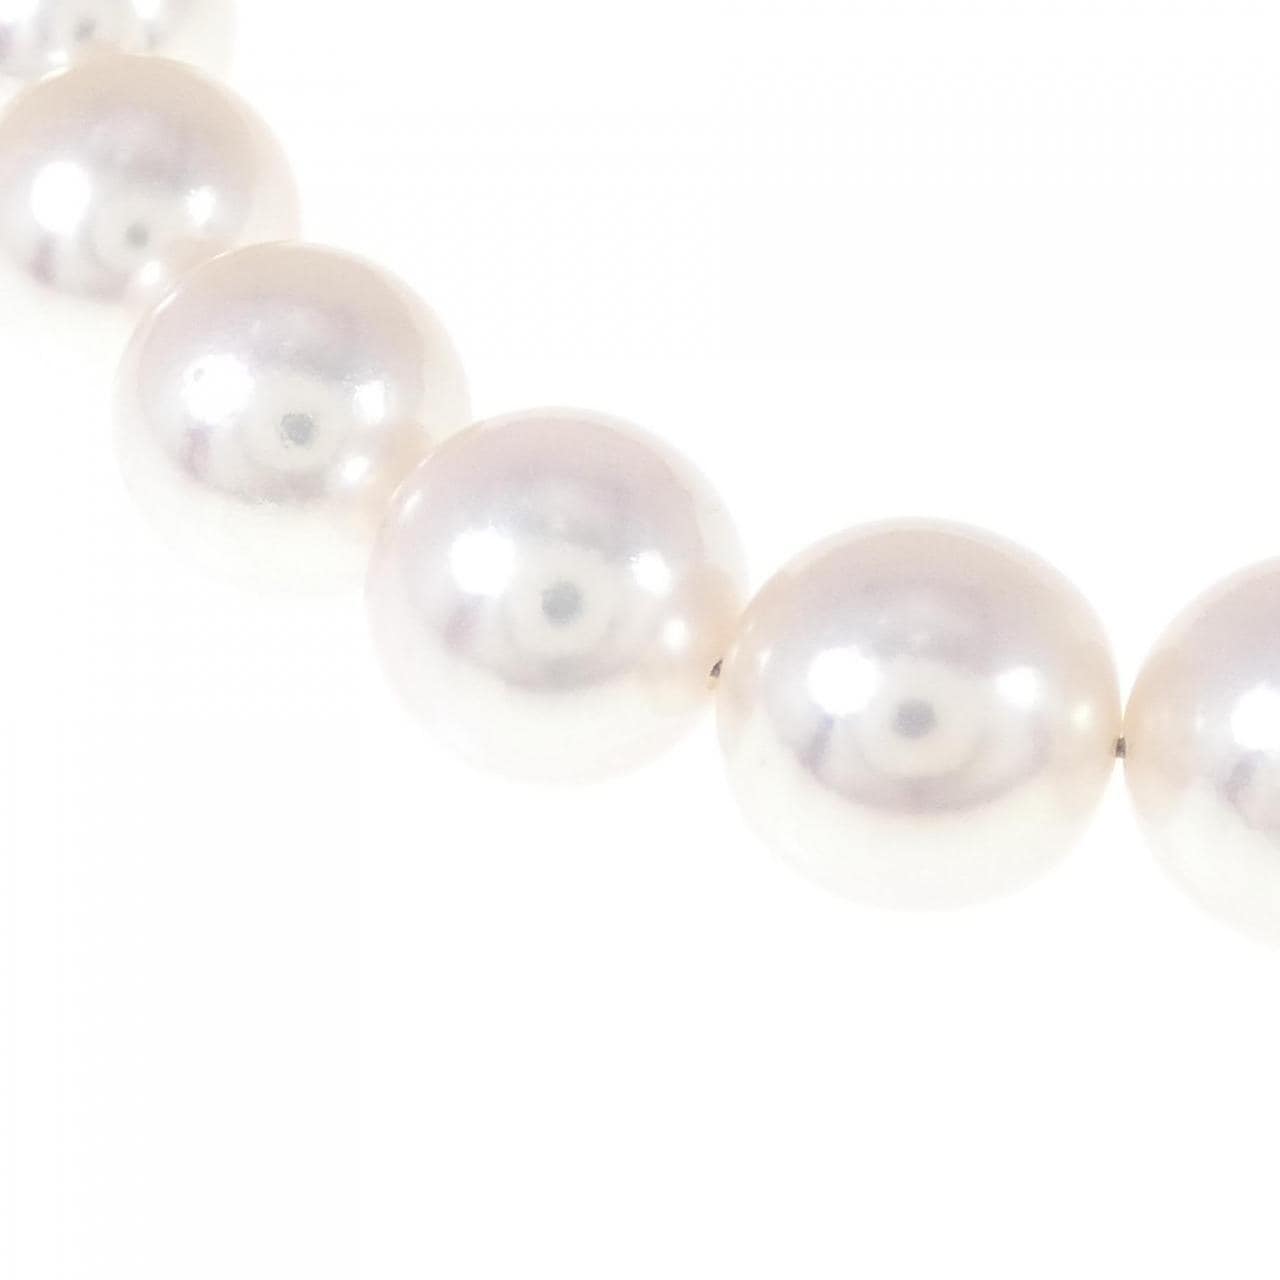 [BRAND NEW] Silver Clasp Flower Bead Akoya Pearl Necklace 9-9.5mm